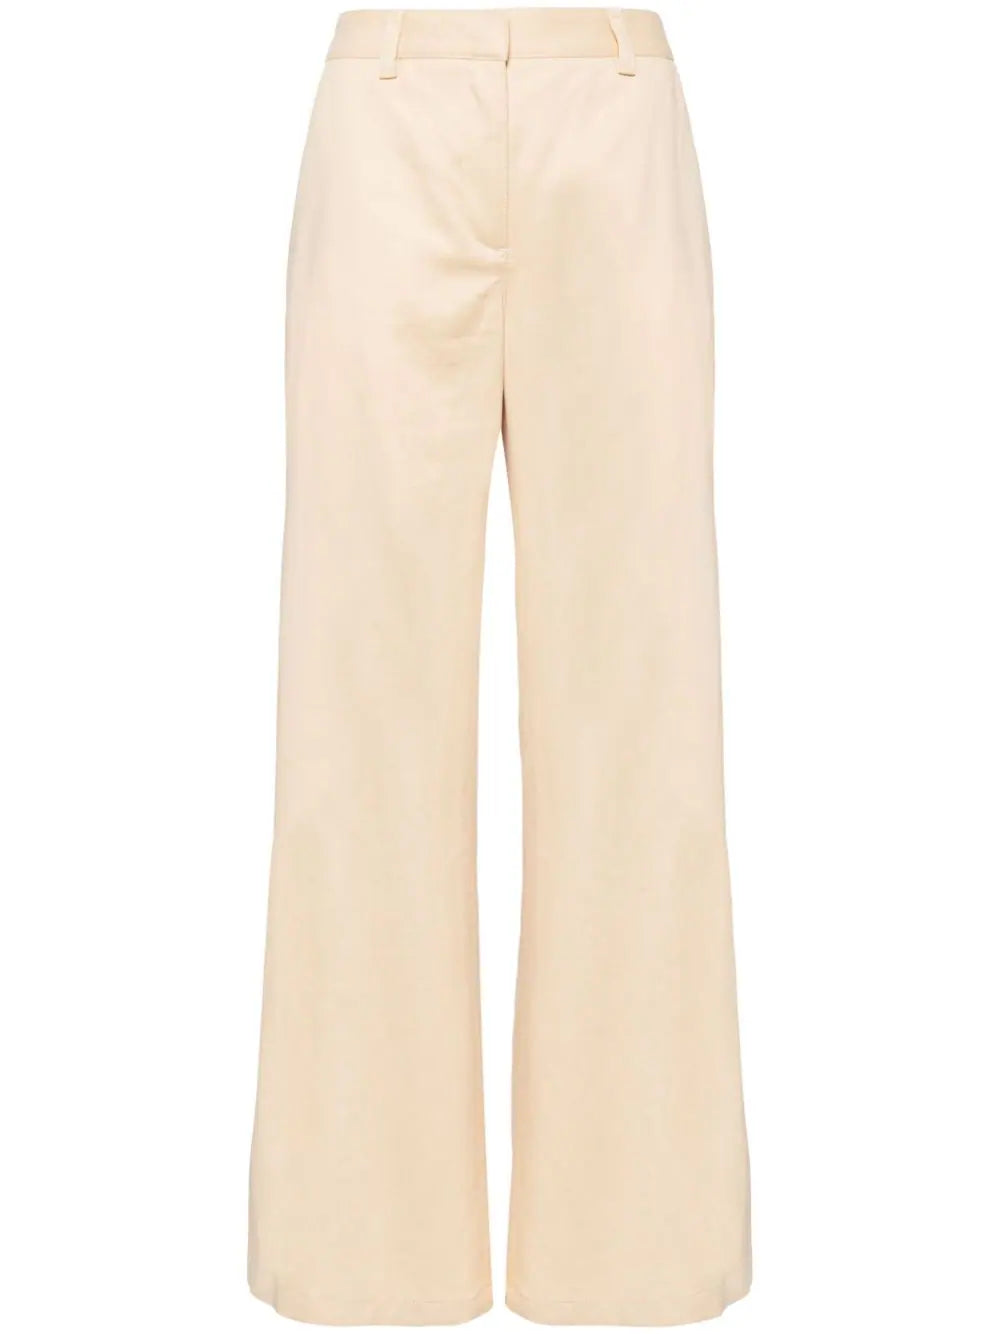 Howard Pant in Butter